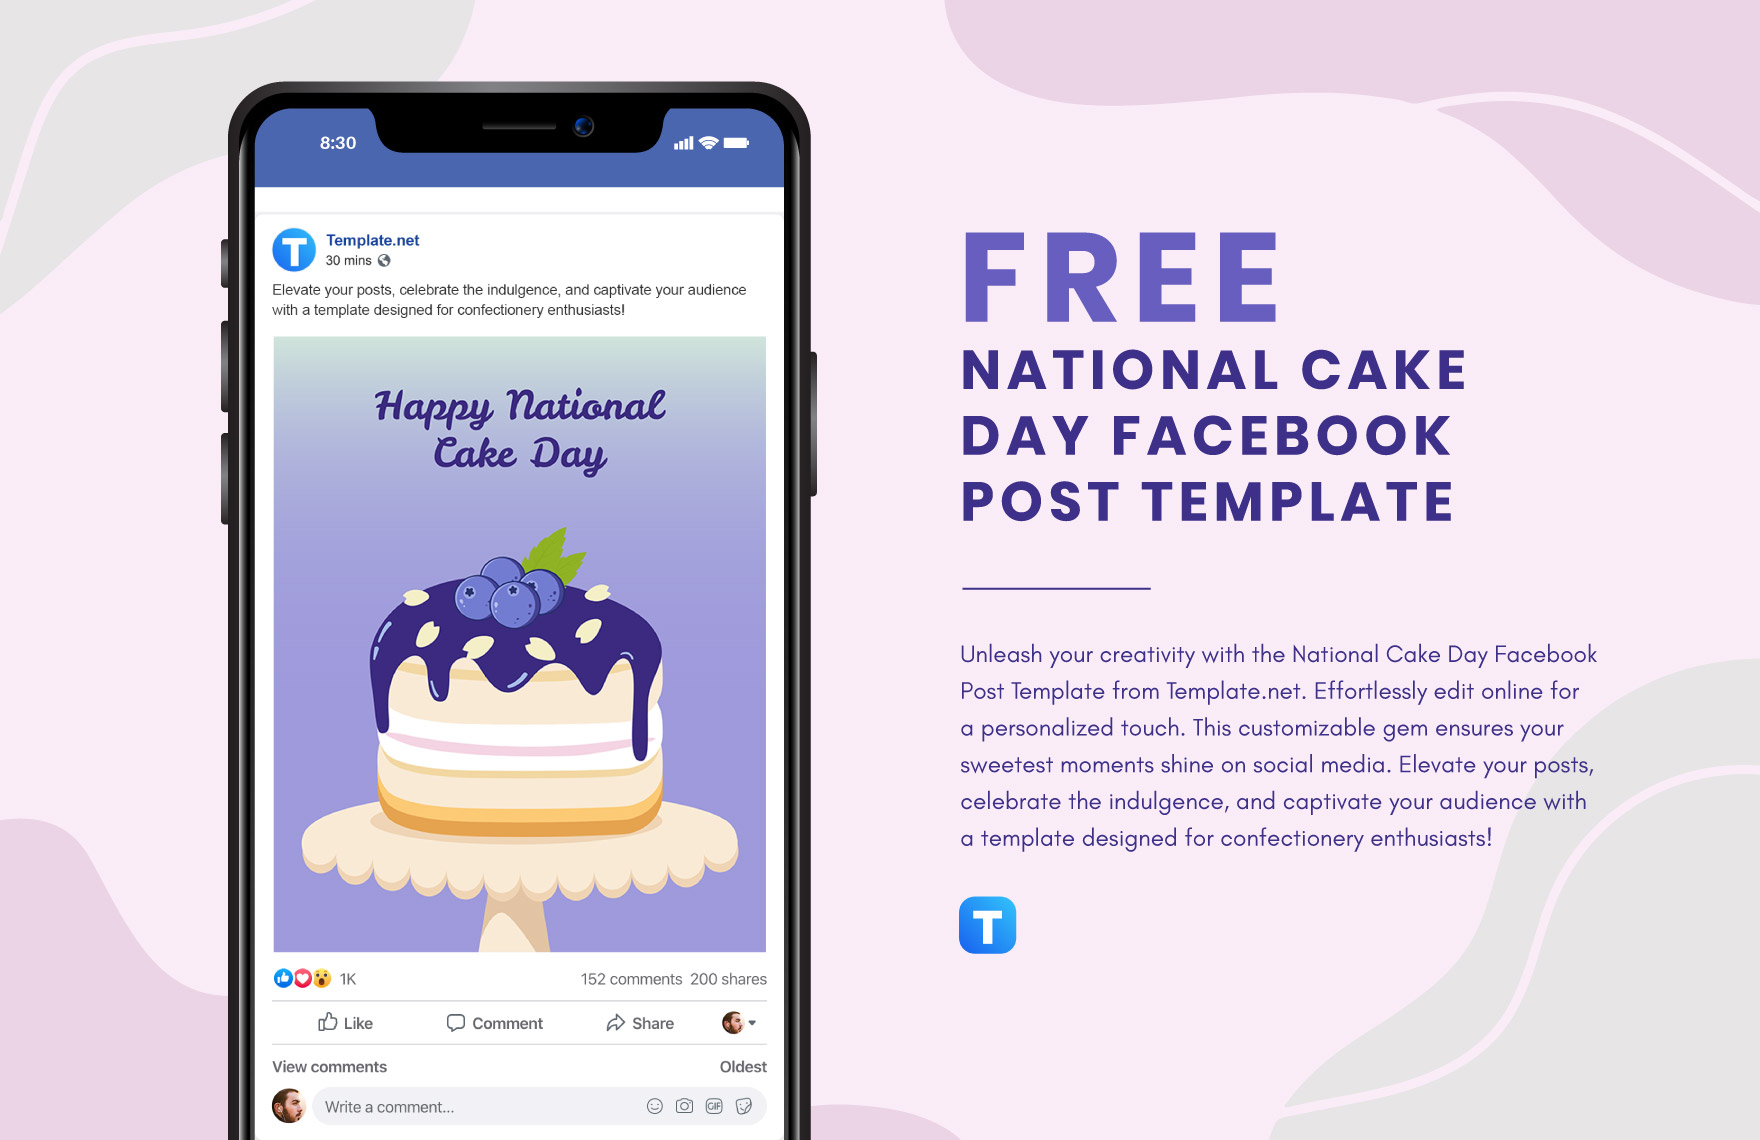 National Cake Day Facebook Post Template